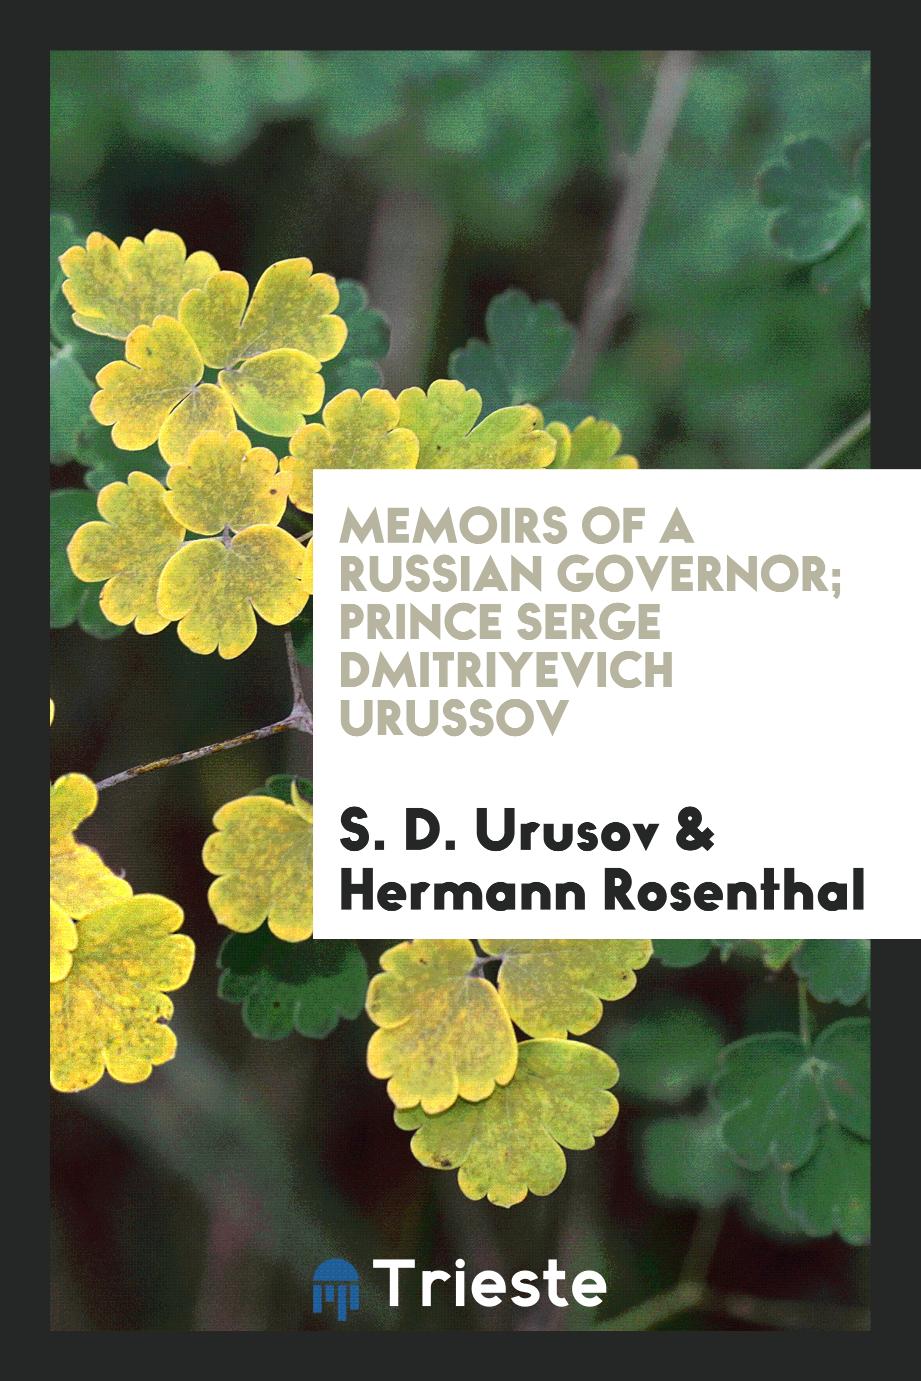 Memoirs of a Russian governor; Prince Serge Dmitriyevich Urussov